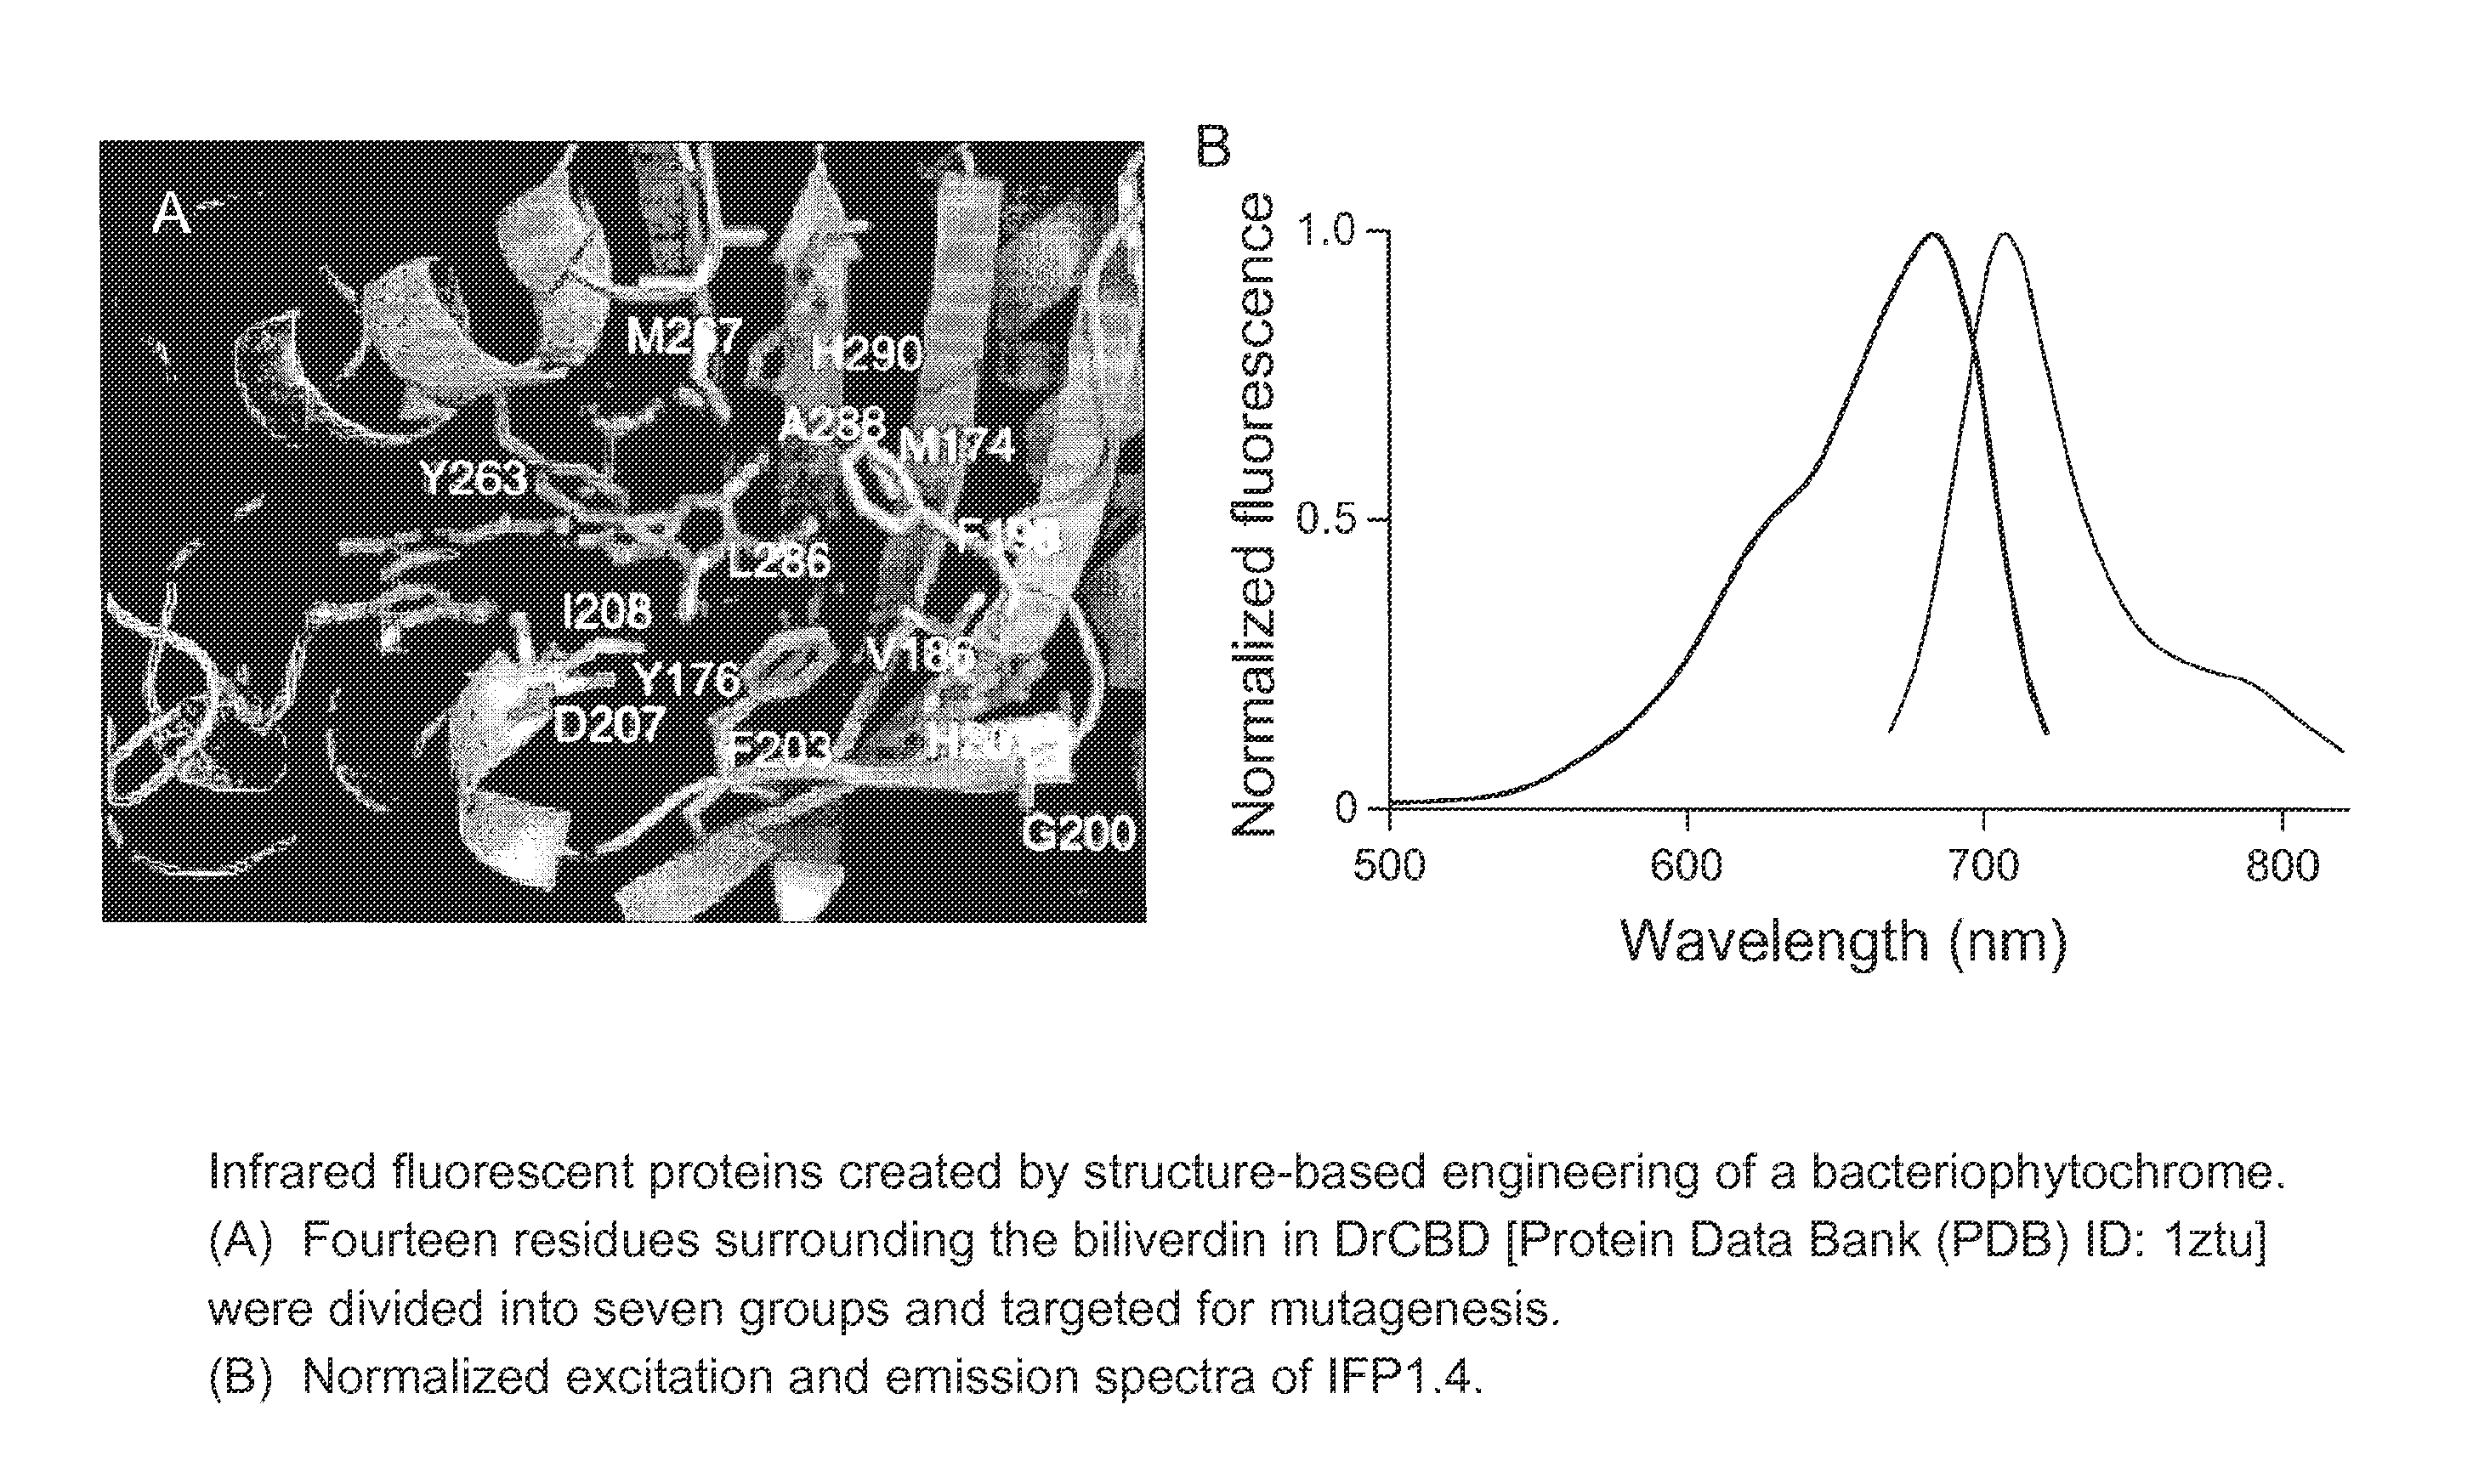 Proteins that fluoresce at infrared wavelengths or generate singlet oxygen upon illumination